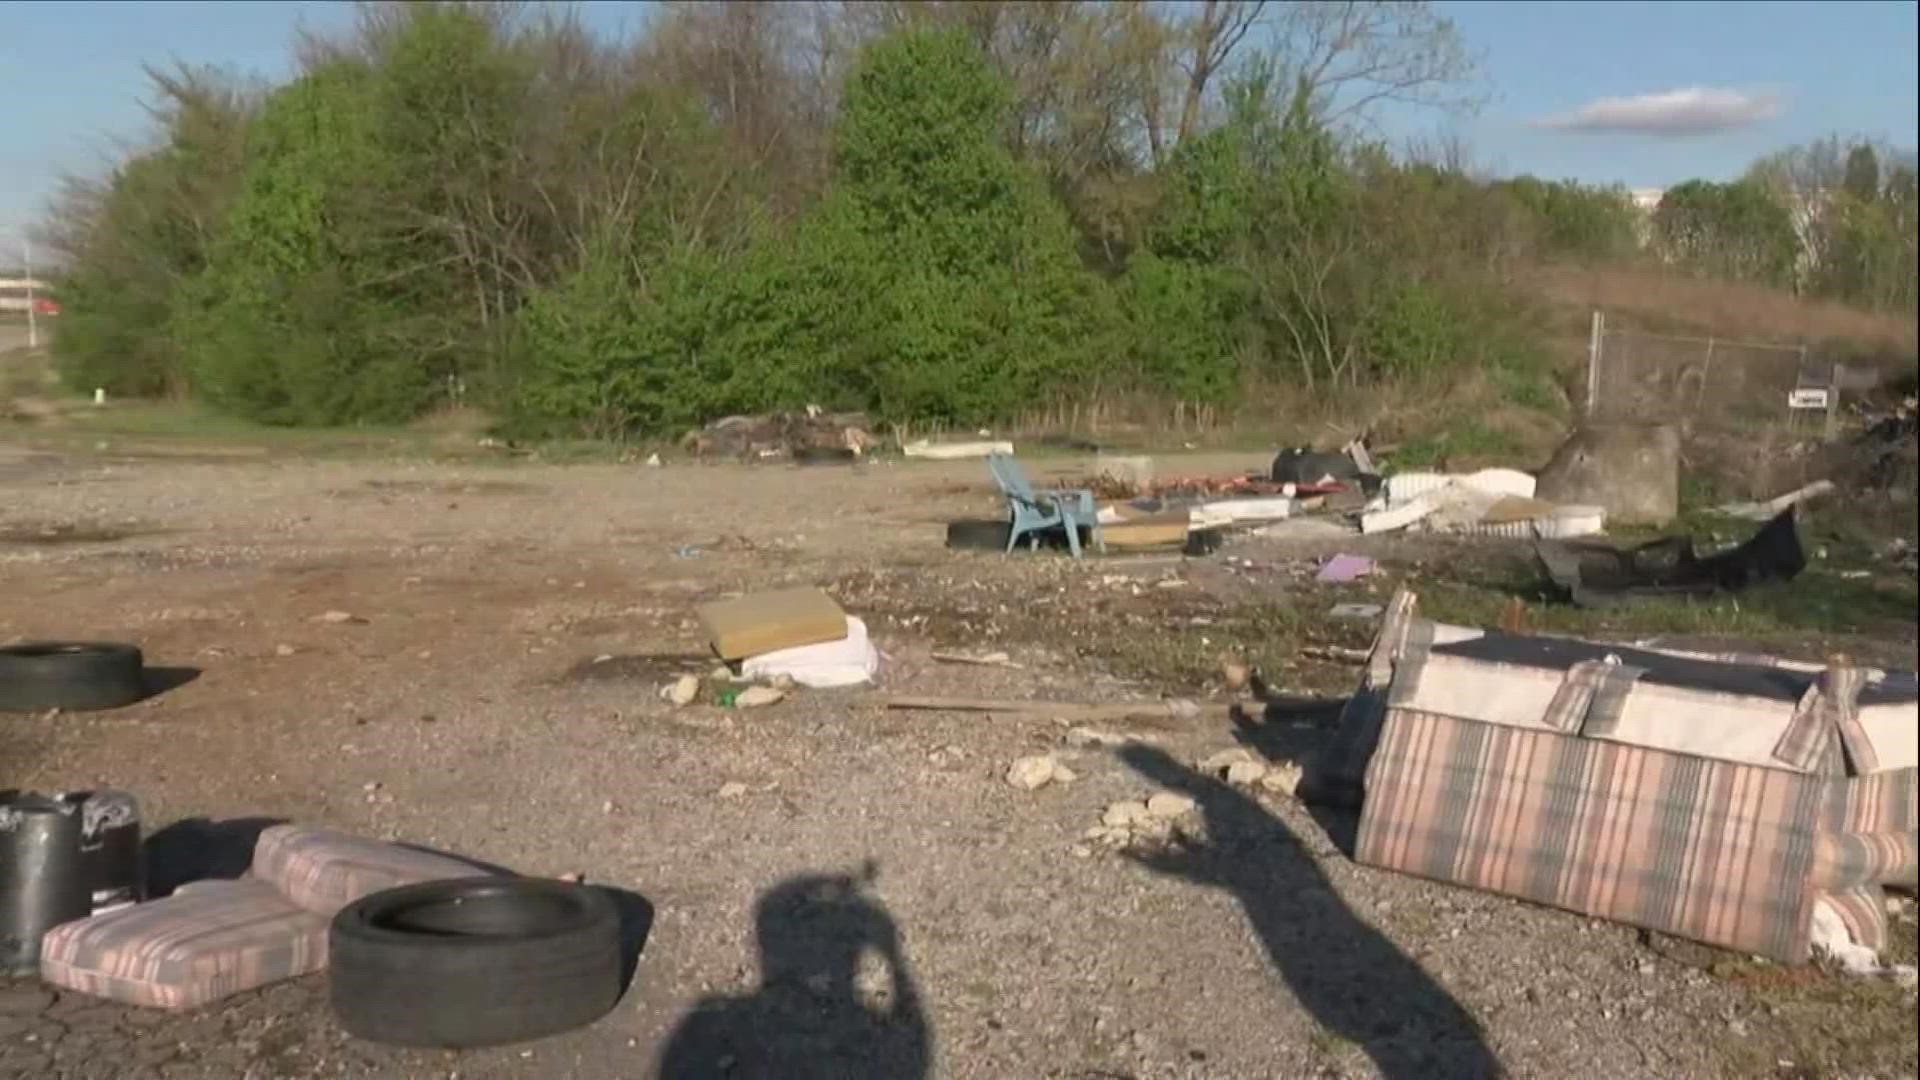 City of Memphis officials said they are taking actions to combat illegal dumping, which is on the rise in the Bluff City, such as adding covert cameras around town.